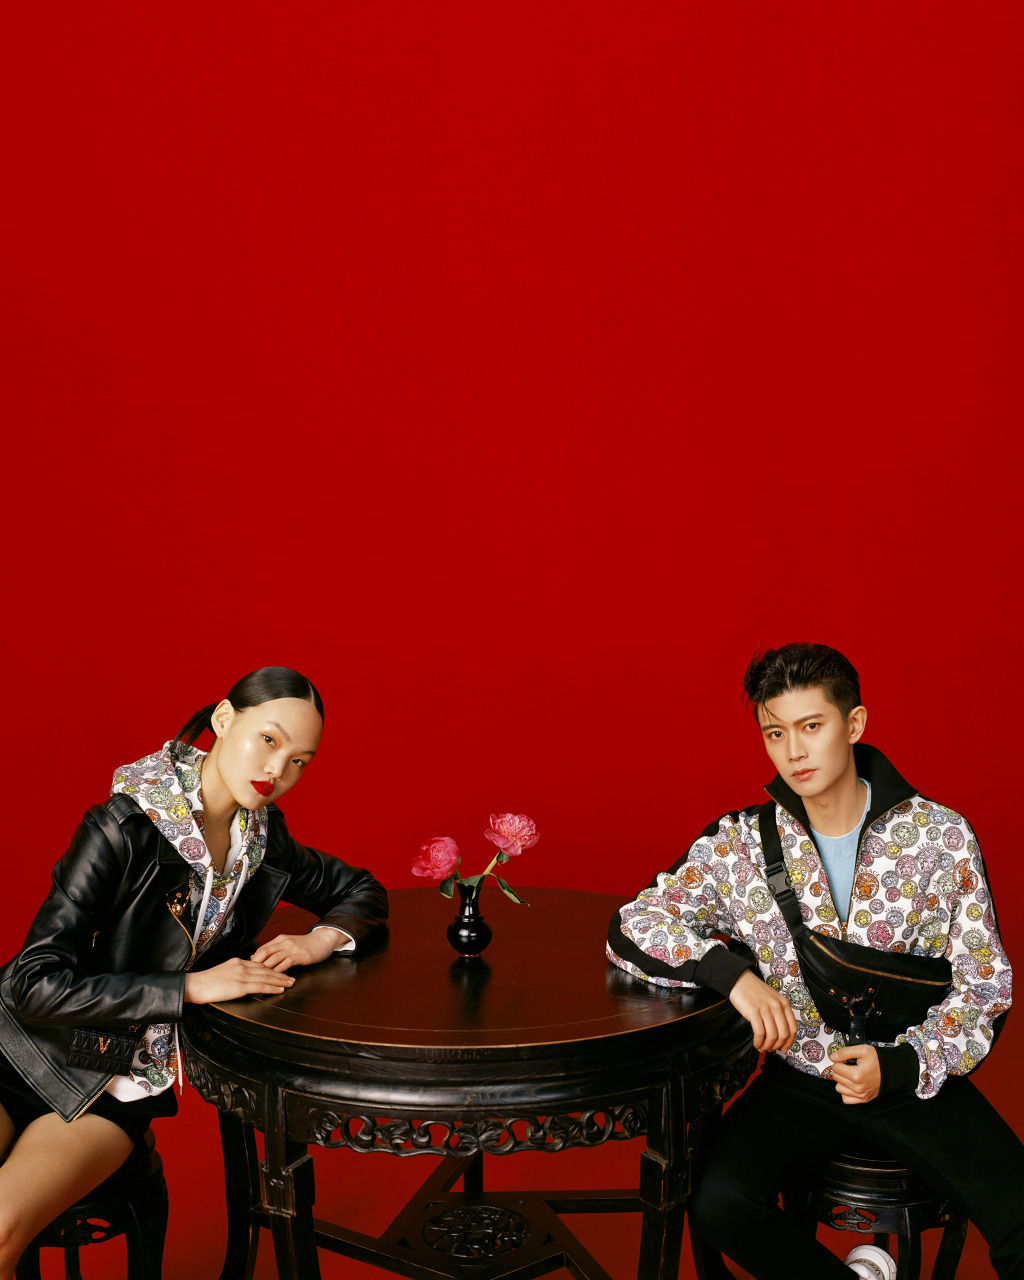 Versace Lunar New Year Capsule Collection - The Luxury Network